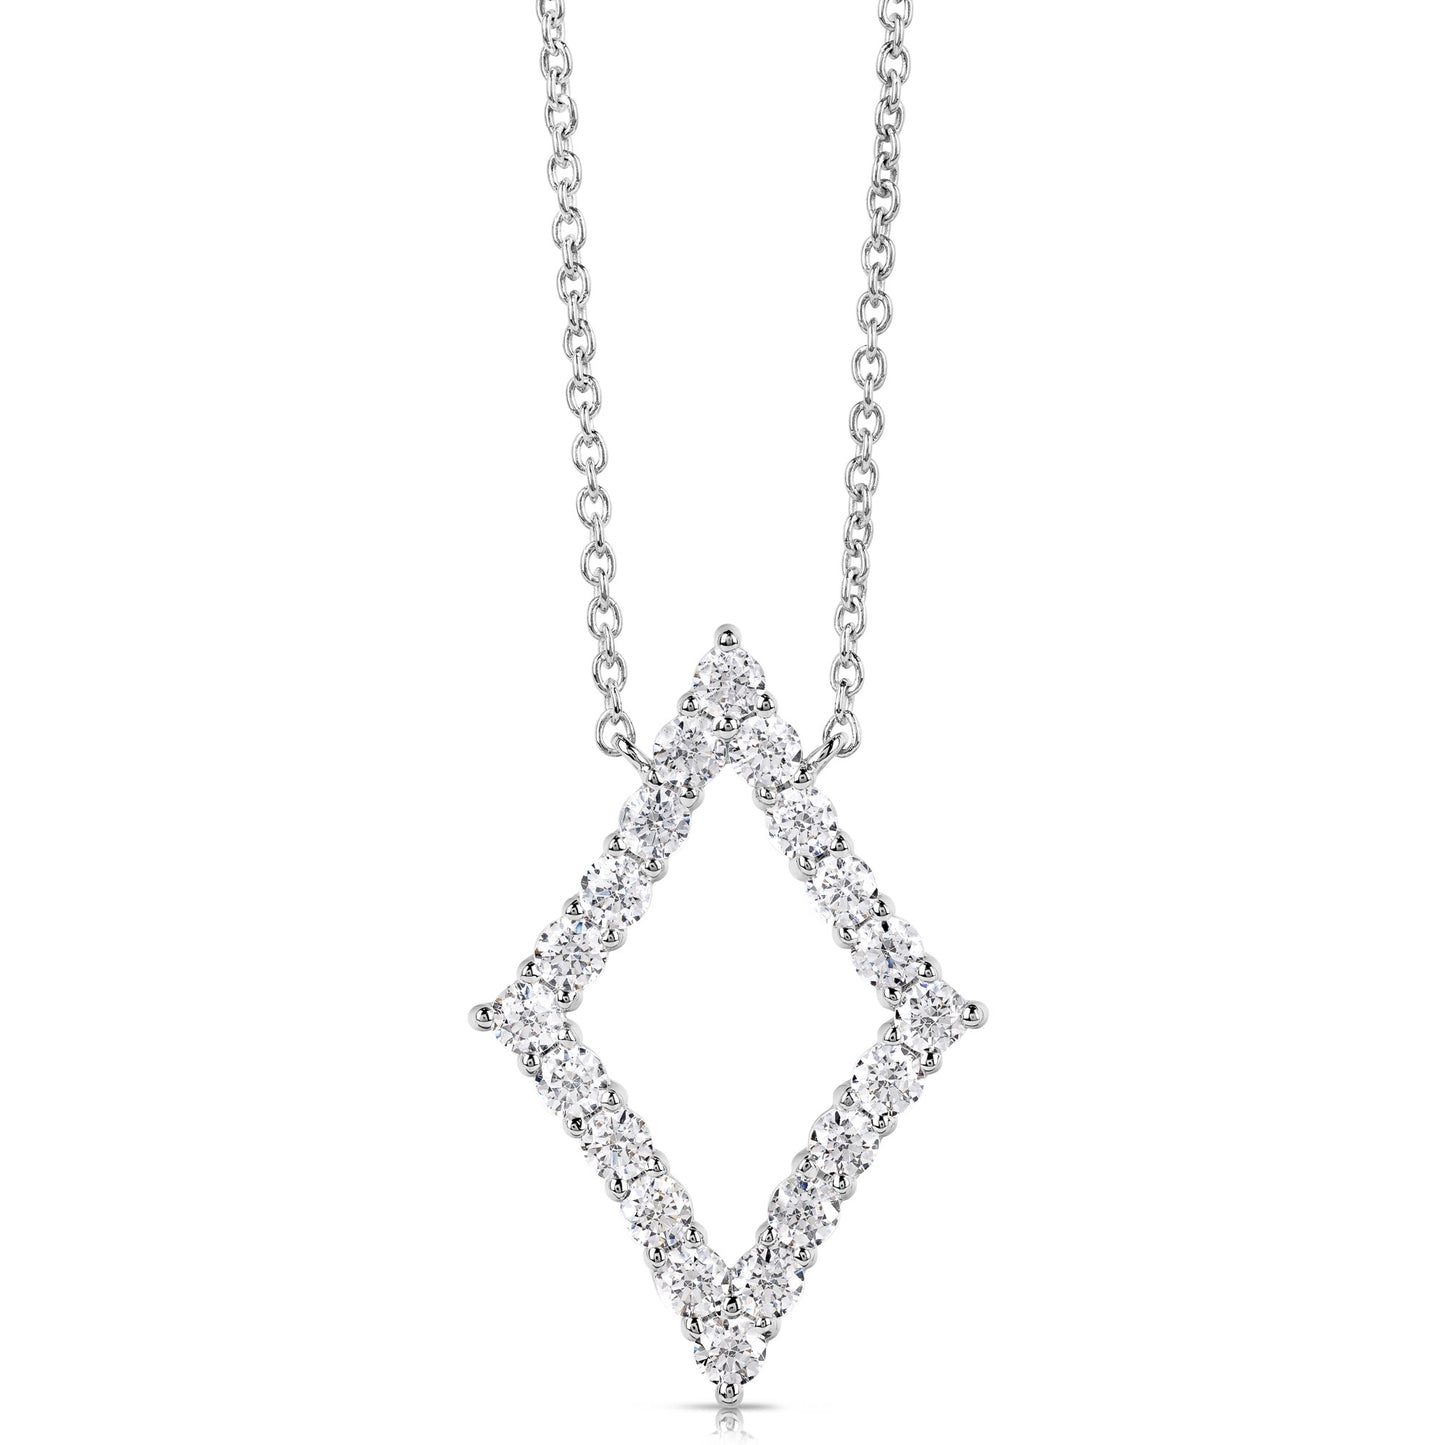 1/2 CT COLORLESS FLAWLESS DIAMOND SHAPED PENDANT